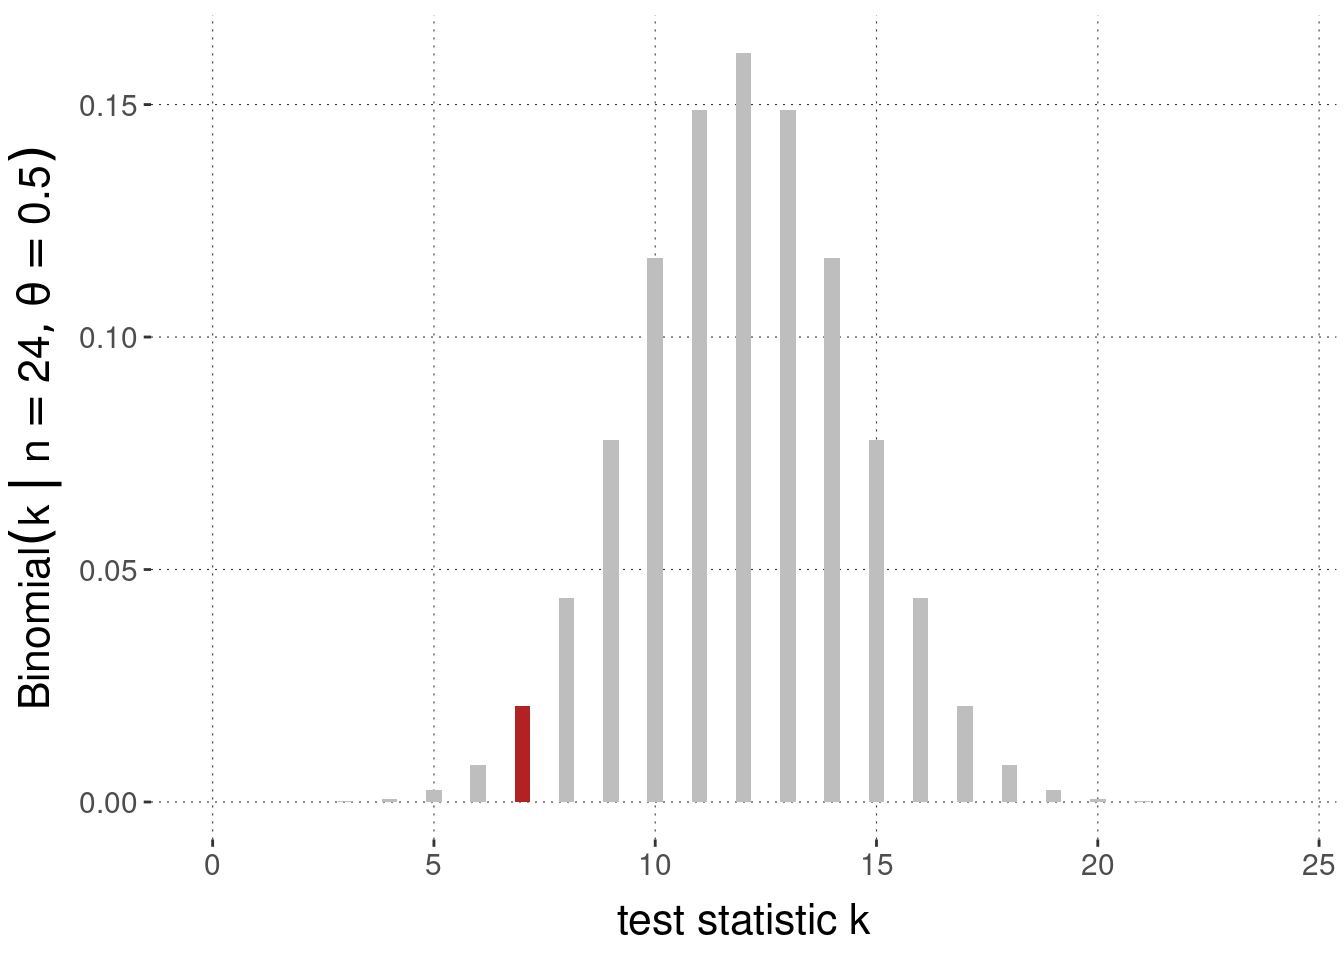 Sampling distribution (here: Binomial distribution) and the probability associated with observed data $k=7$ highlighted in red, for $N = 24$ coin flips, under the assumption of a null hypothesis $\theta = 0.5$.